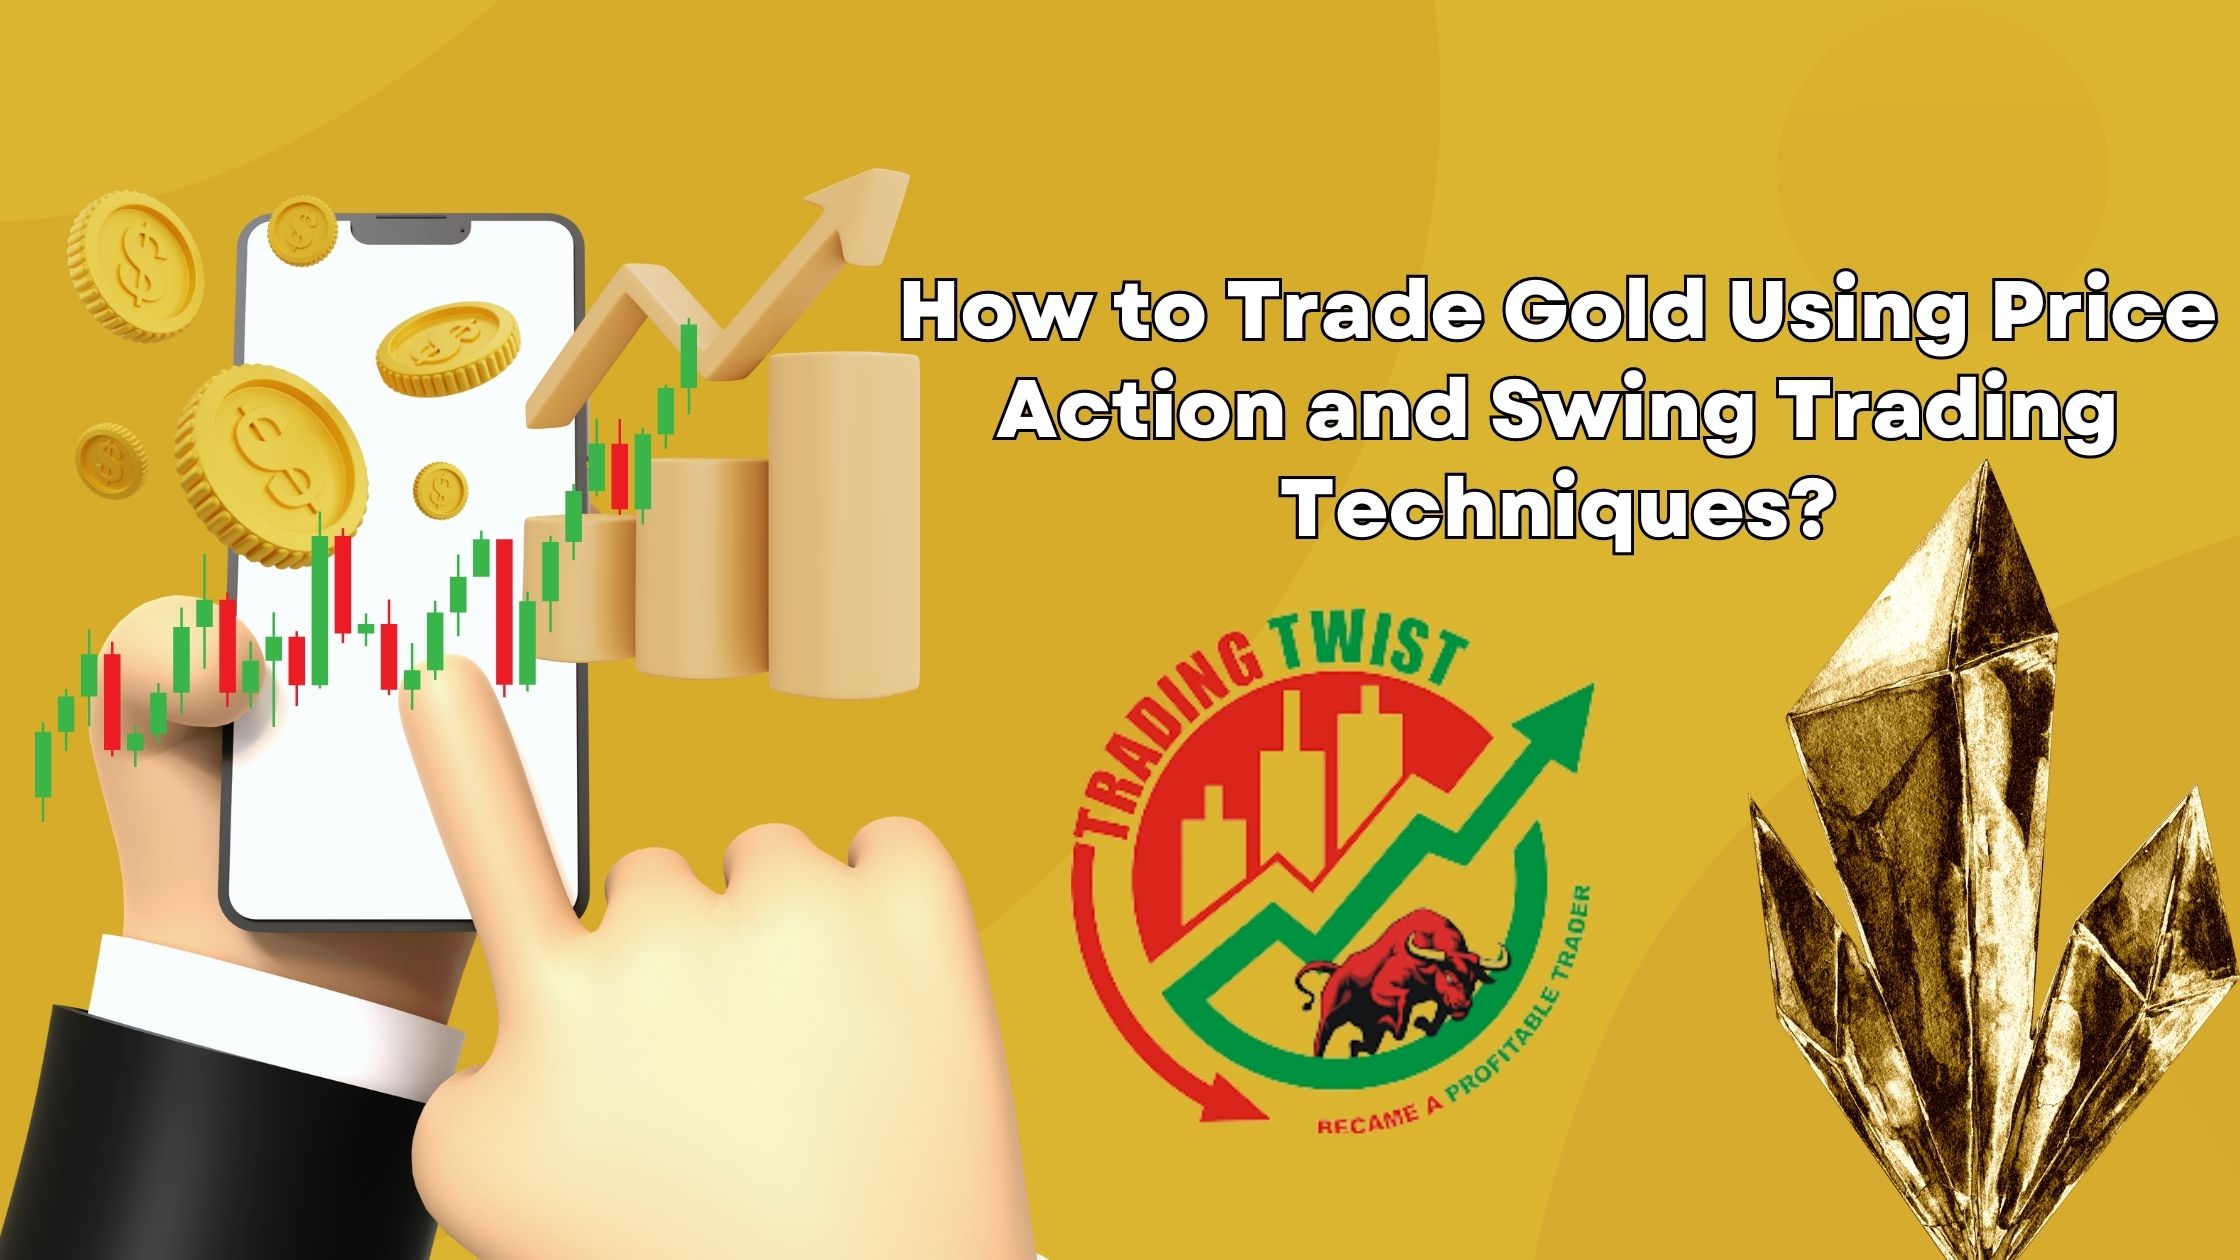 How to Trade Gold Using Price Action and Swing Trading Techniques